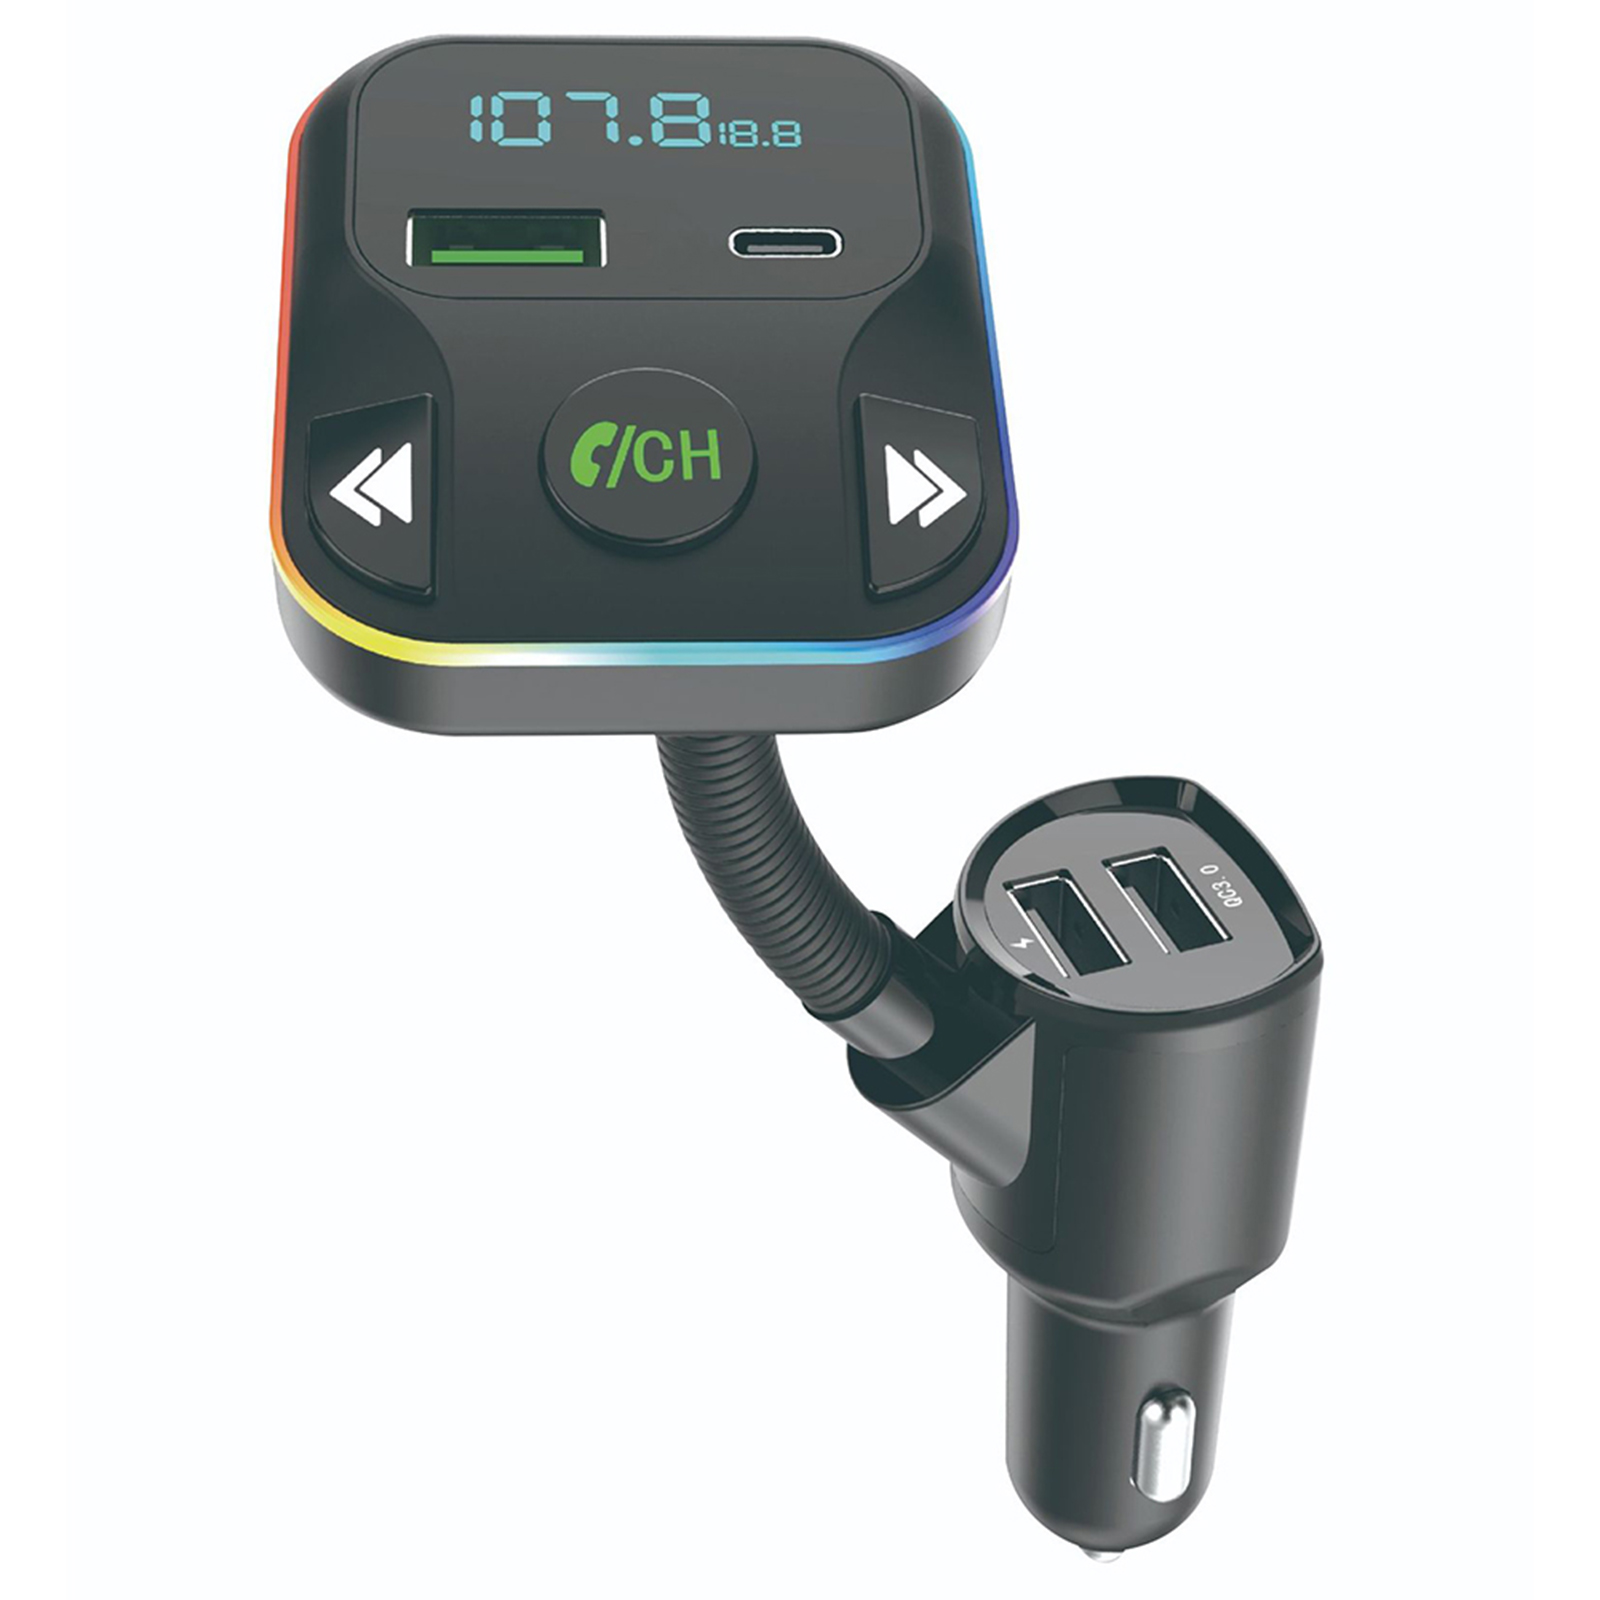 HM02 Car MP3 Player Wireless Radio Adapter FM Transmitter Hands-Free Kit USB Charger With Digital Display